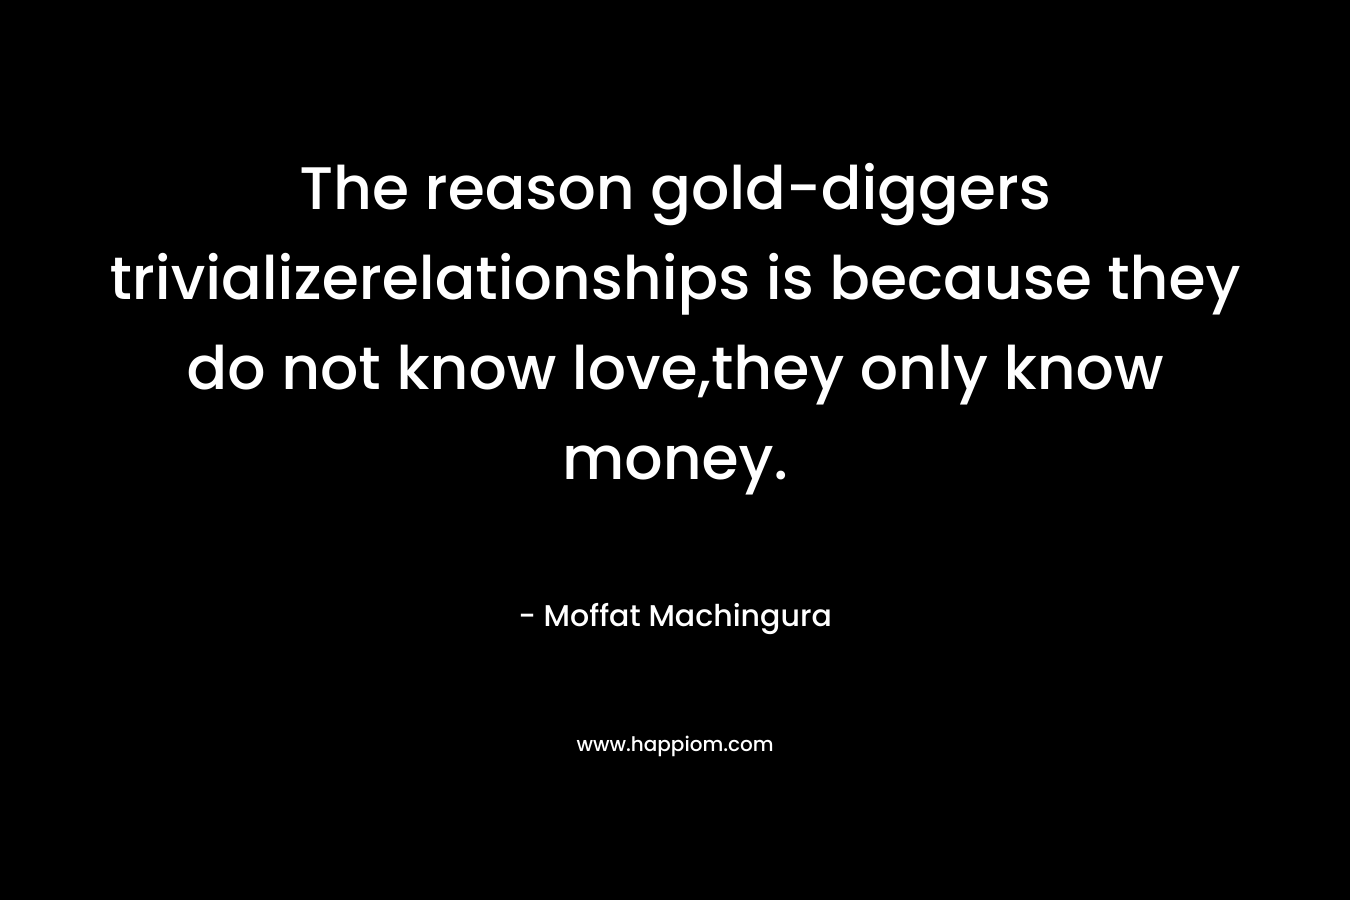 The reason gold-diggers trivializerelationships is because they do not know love,they only know money. – Moffat Machingura